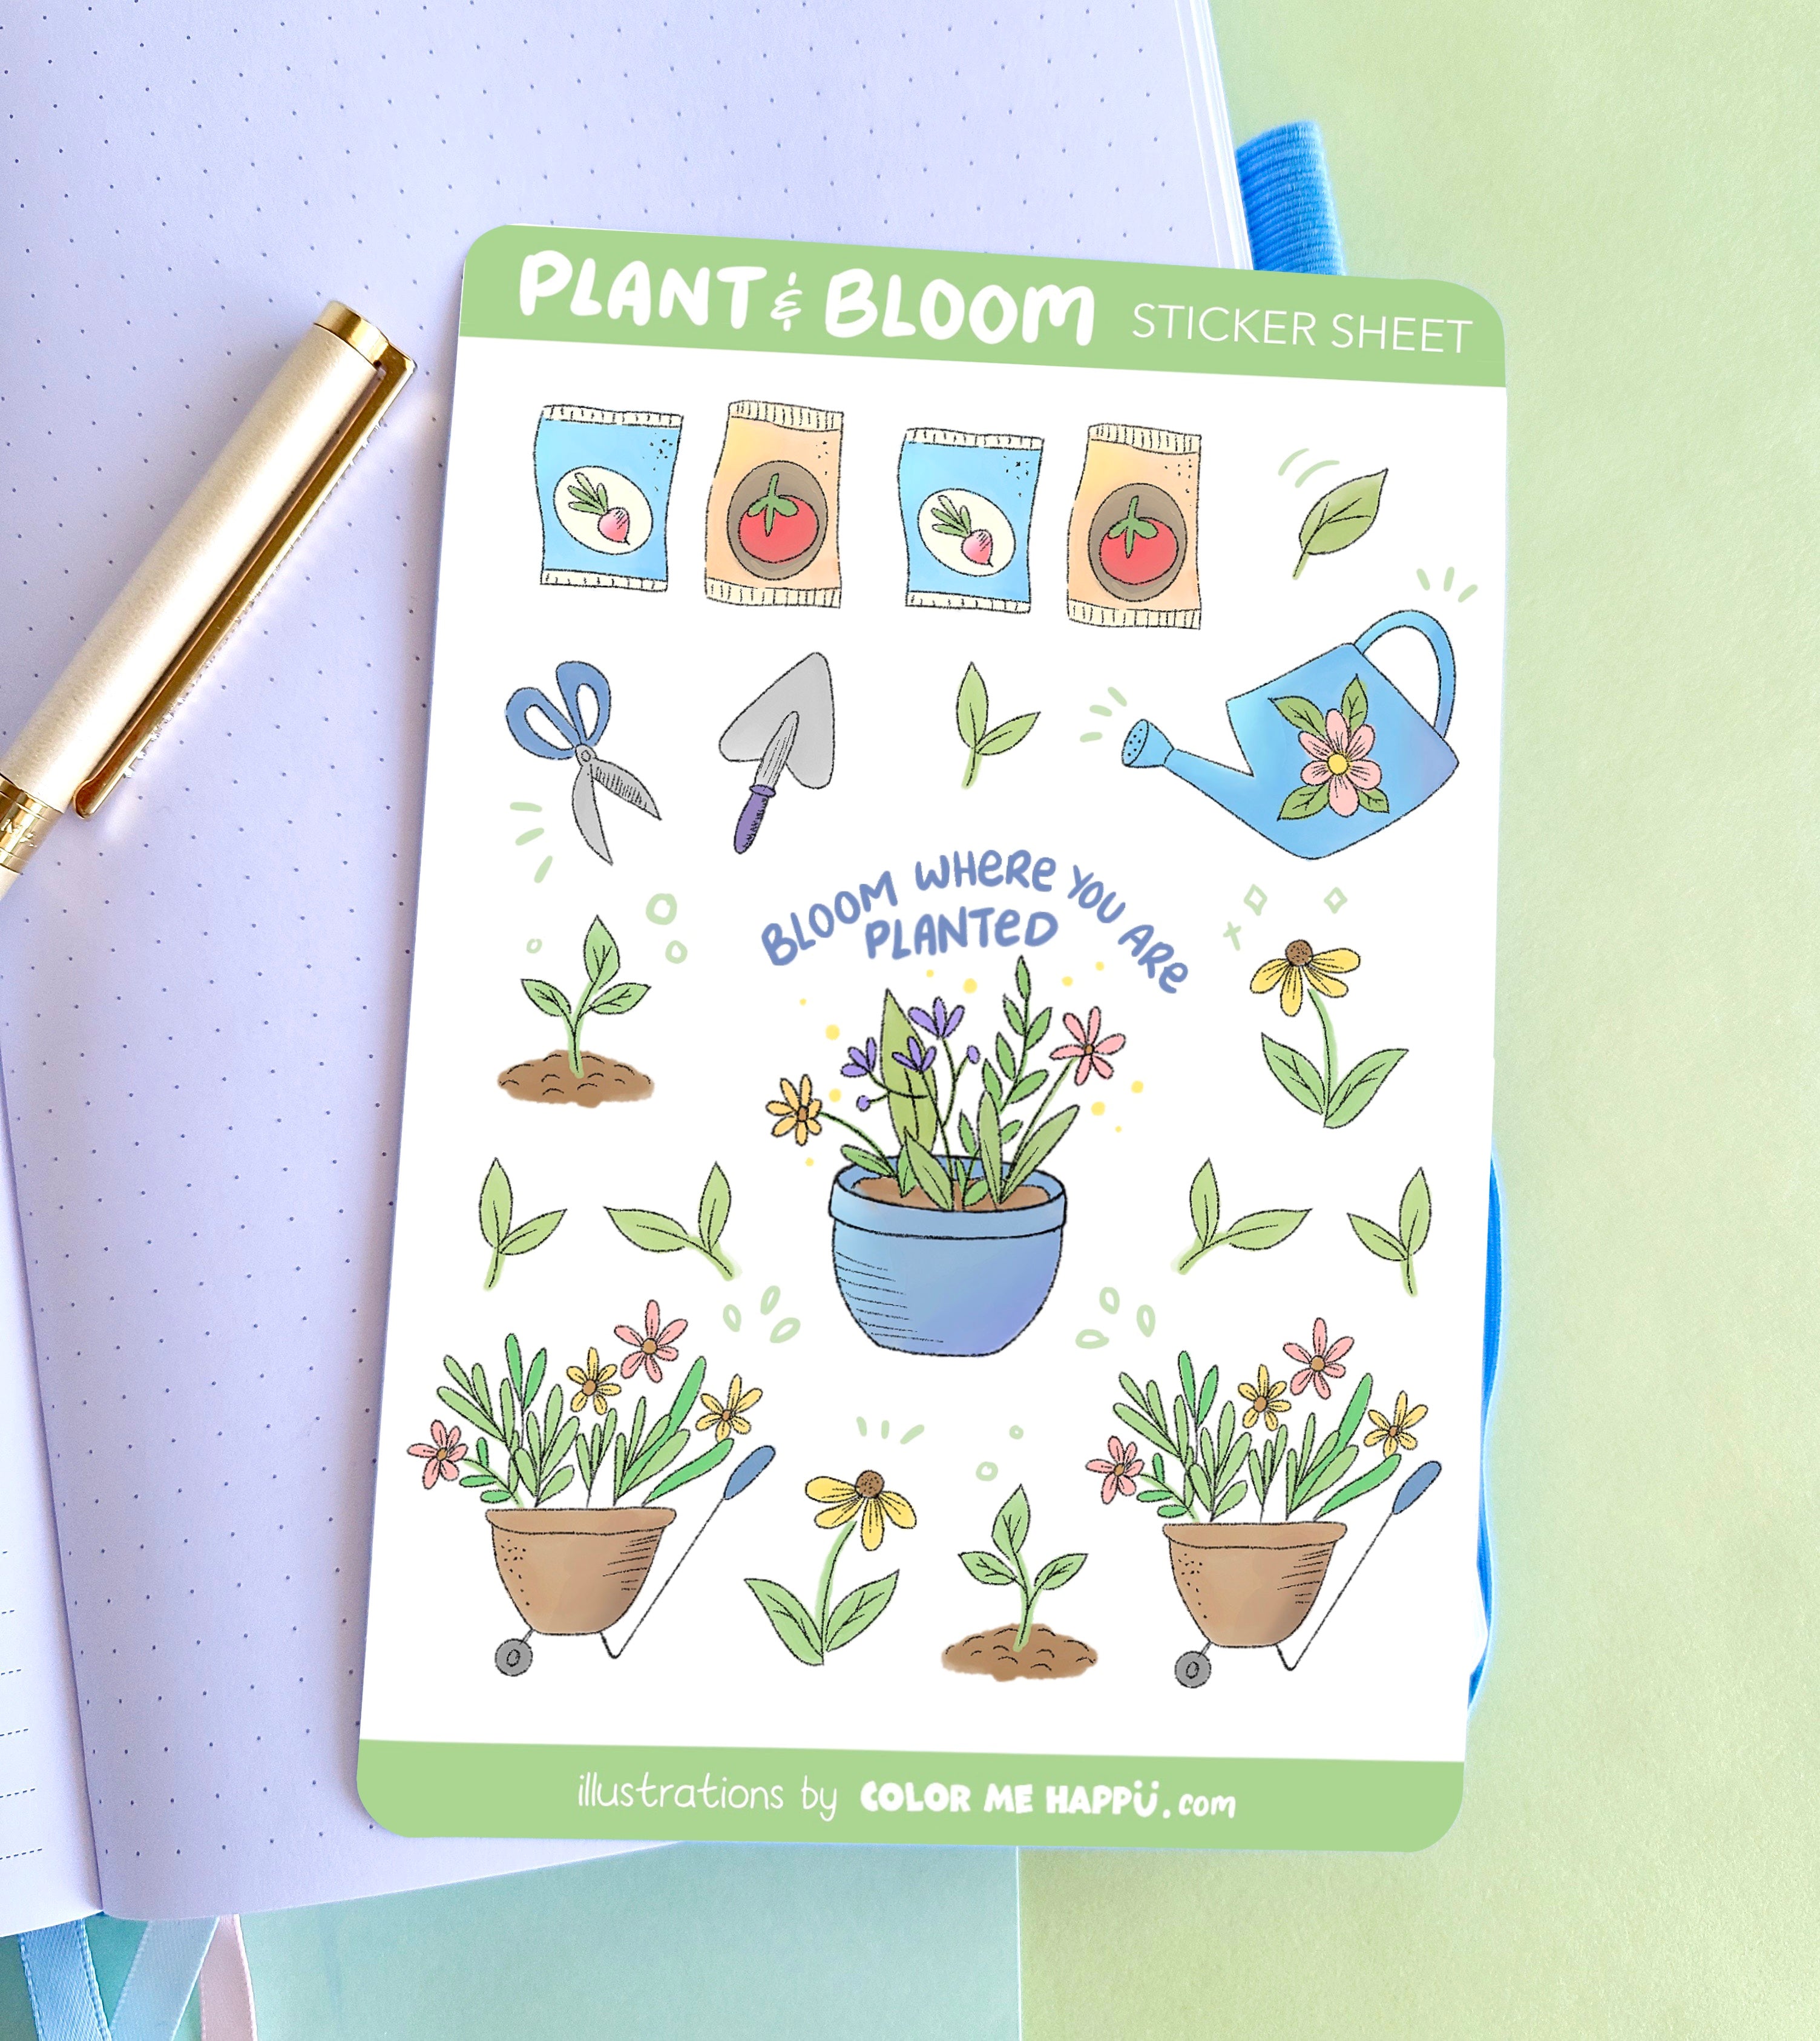 Plant and Bloom Sticker Sheet – Color Me Happii